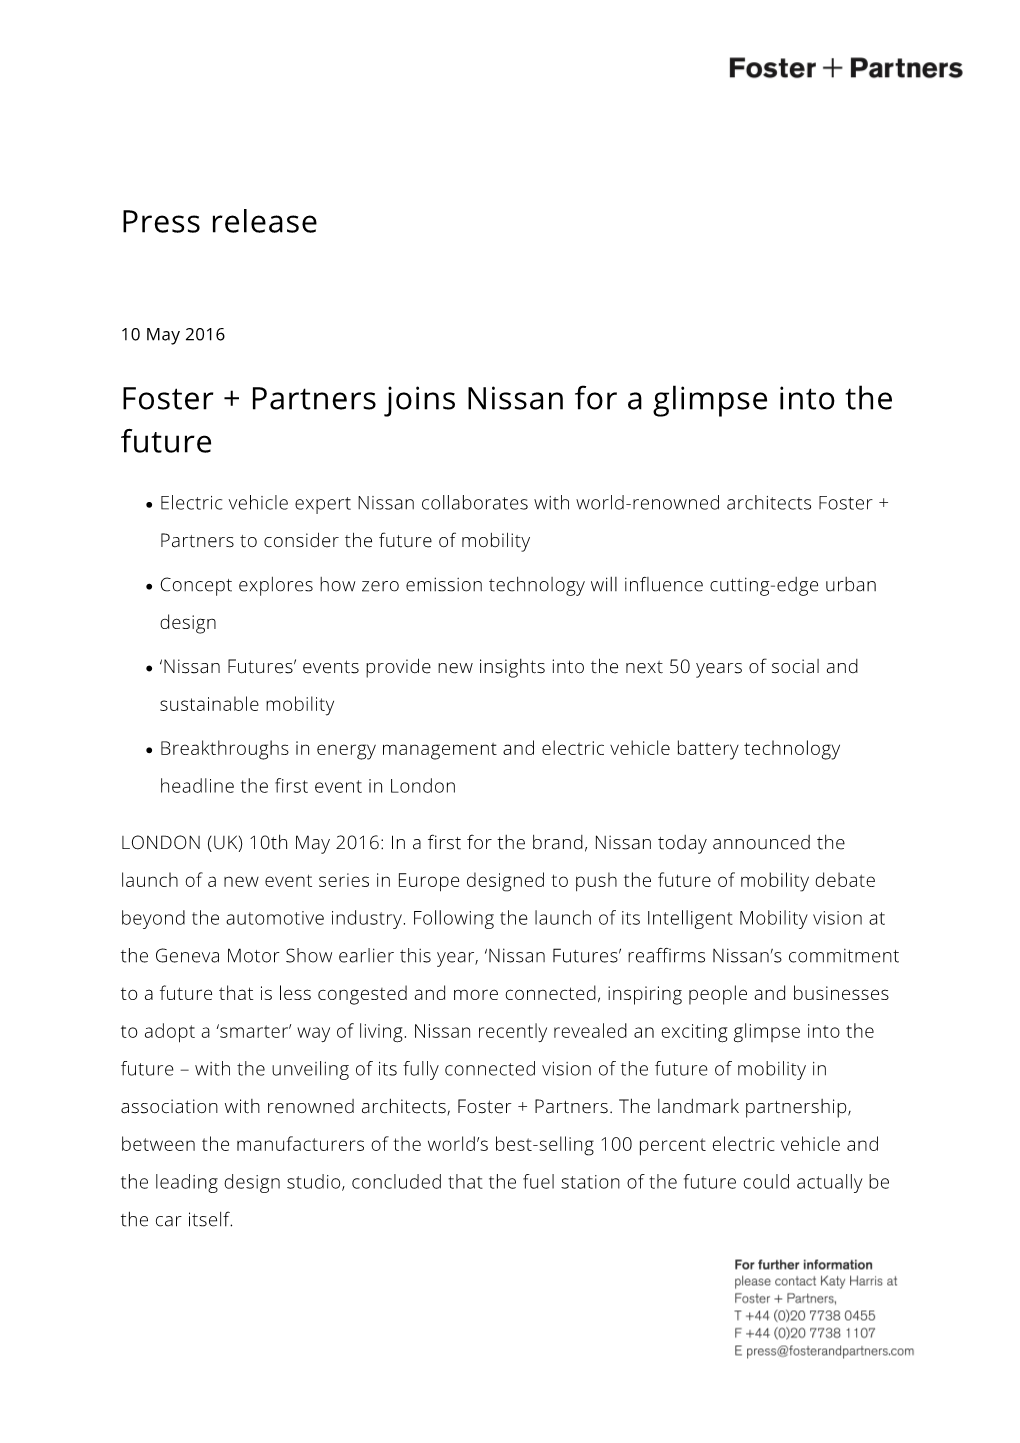 Press Release Foster + Partners Joins Nissan for a Glimpse Into the Future